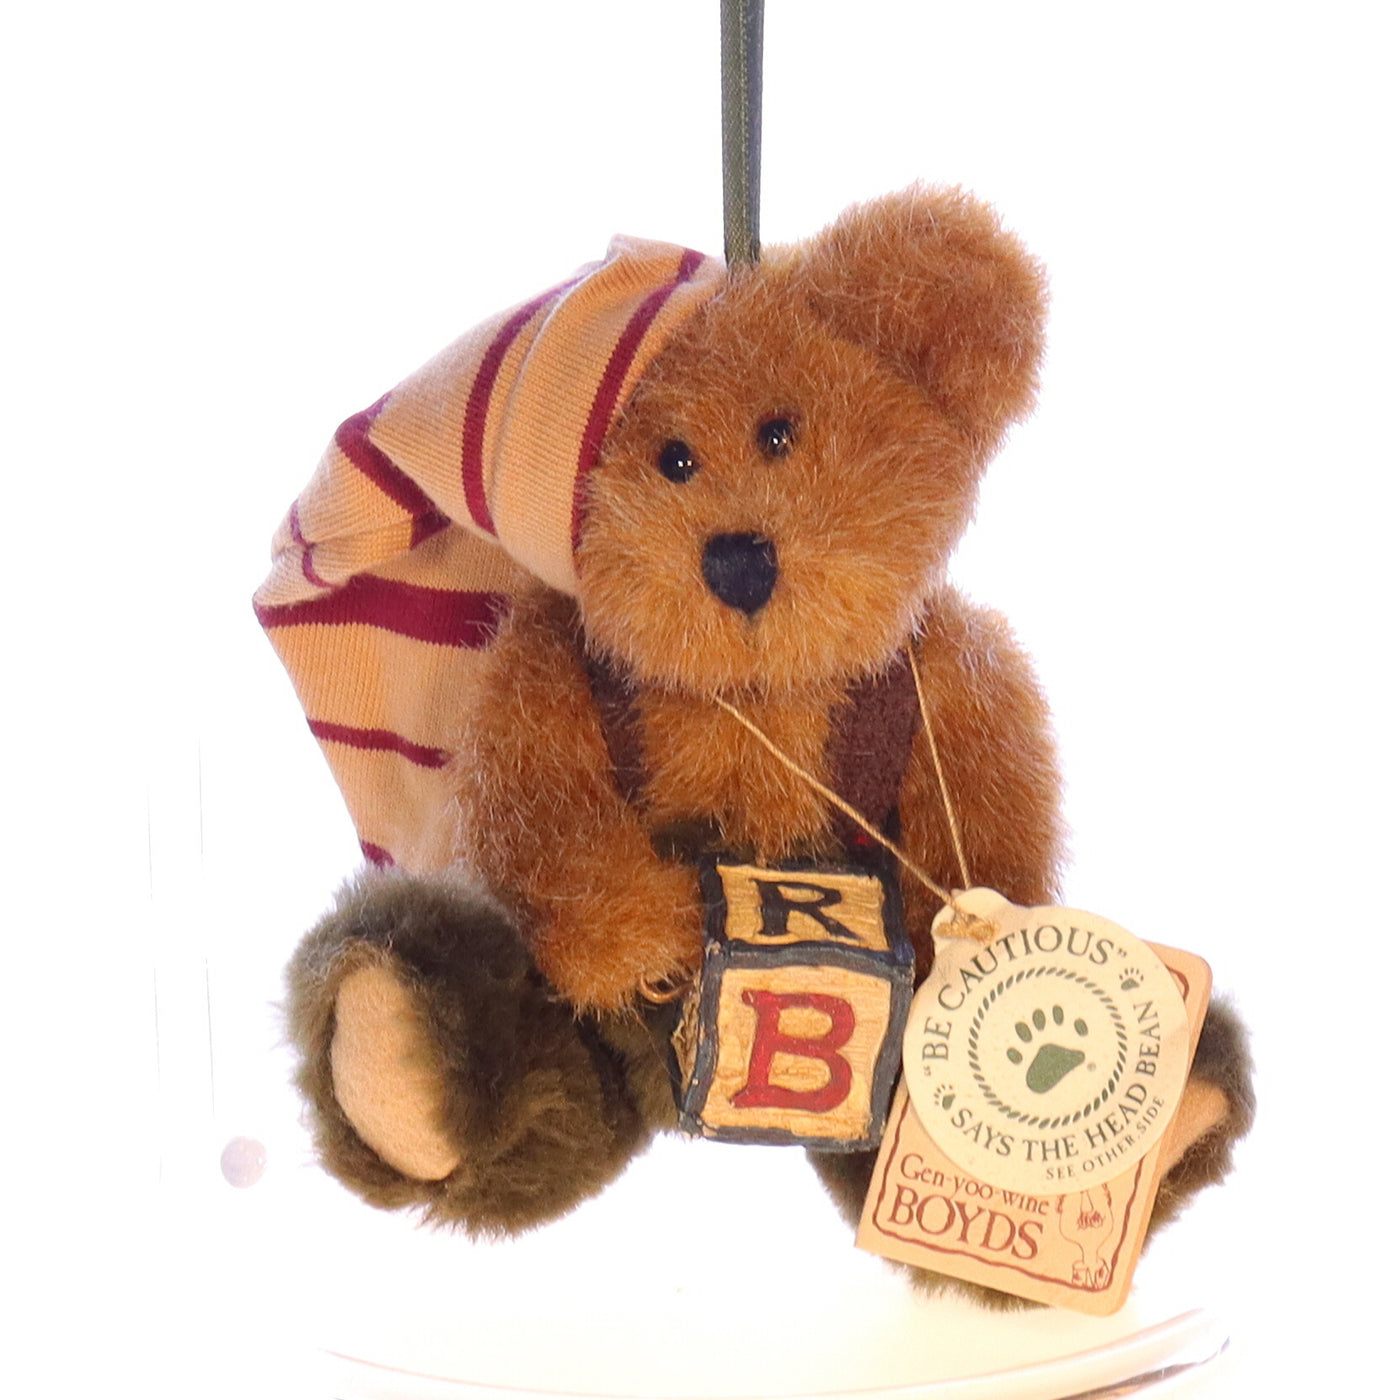 Boyds_Bears_and_Friends_93374V_Otis_T_Elf_Christmas_Ornament_Stuffed_Animal_1988 Front View